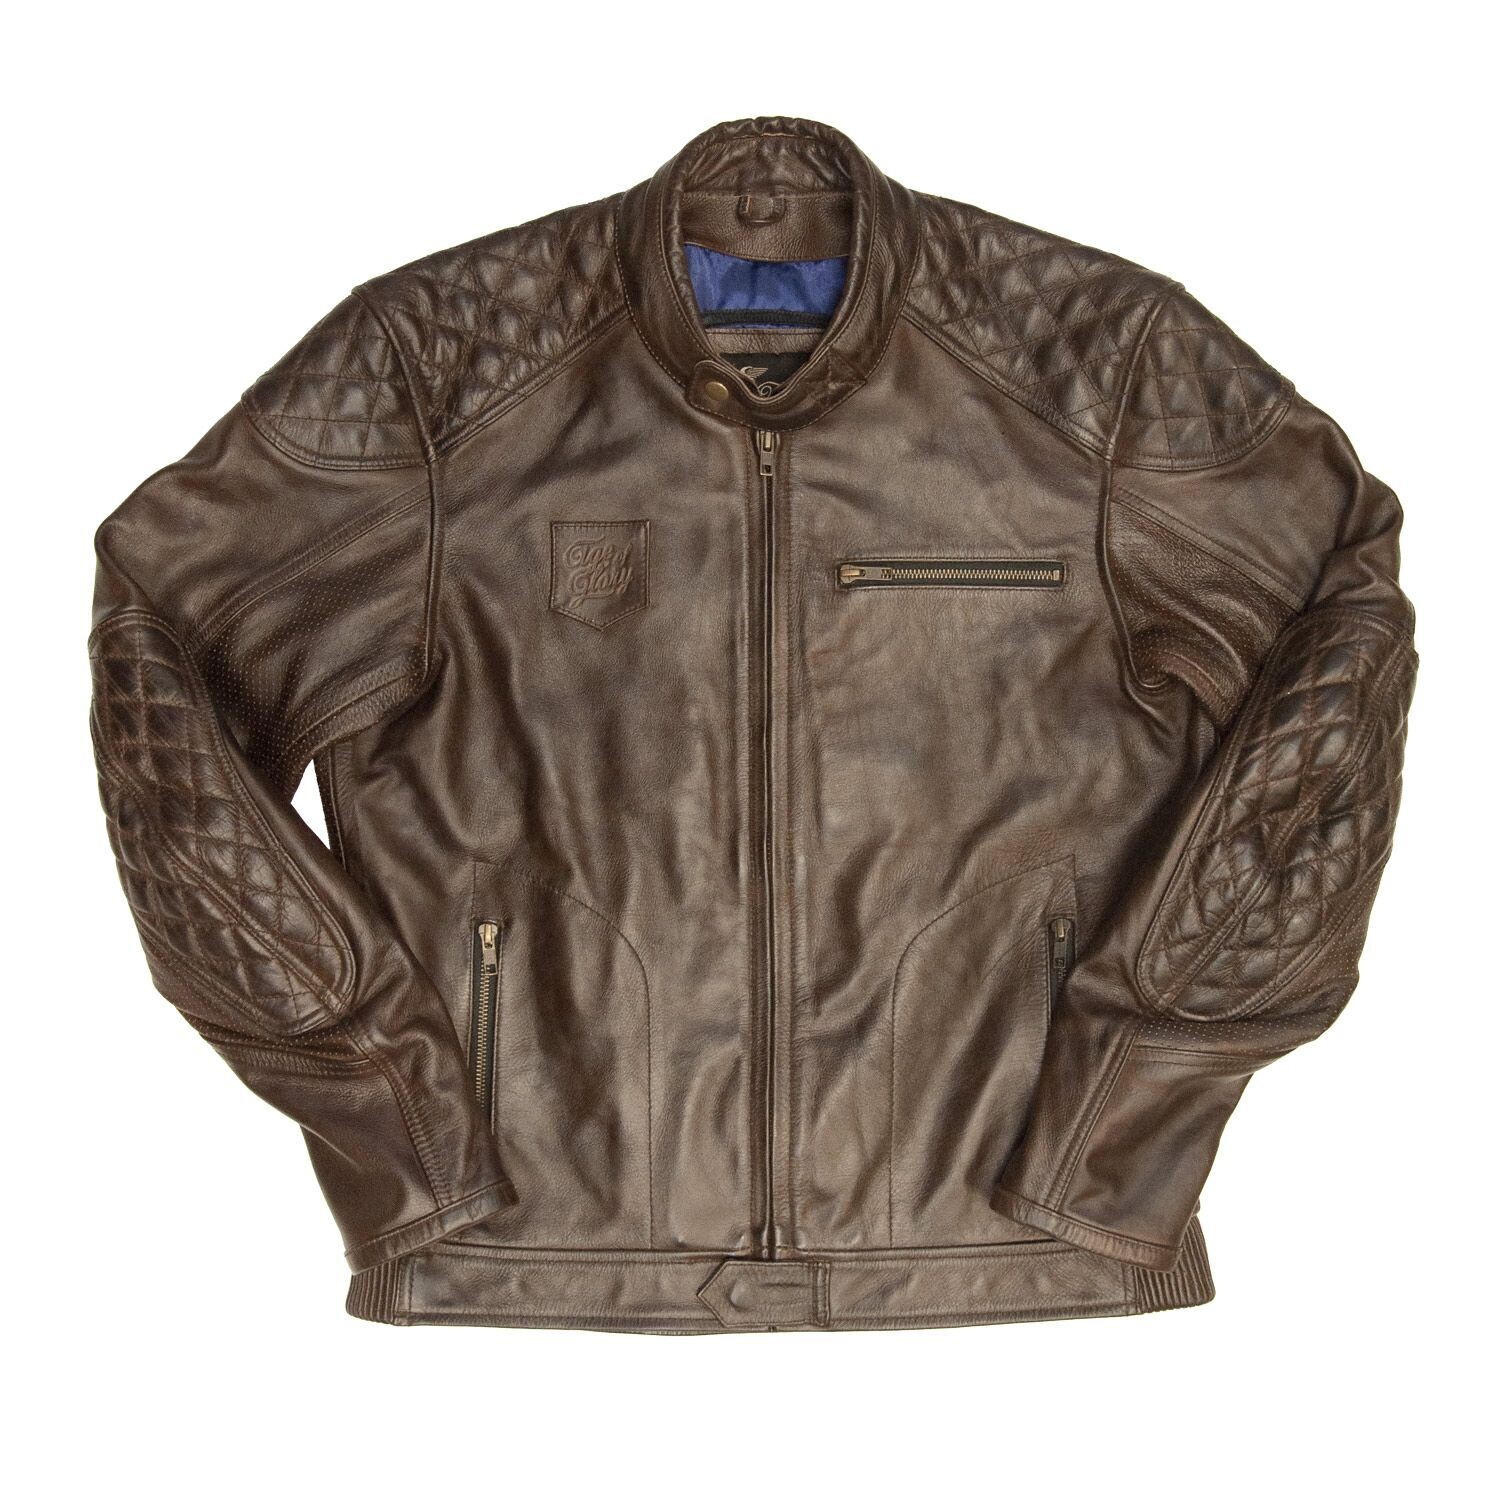 Age of Glory Rogue Leather Jacket - Brown